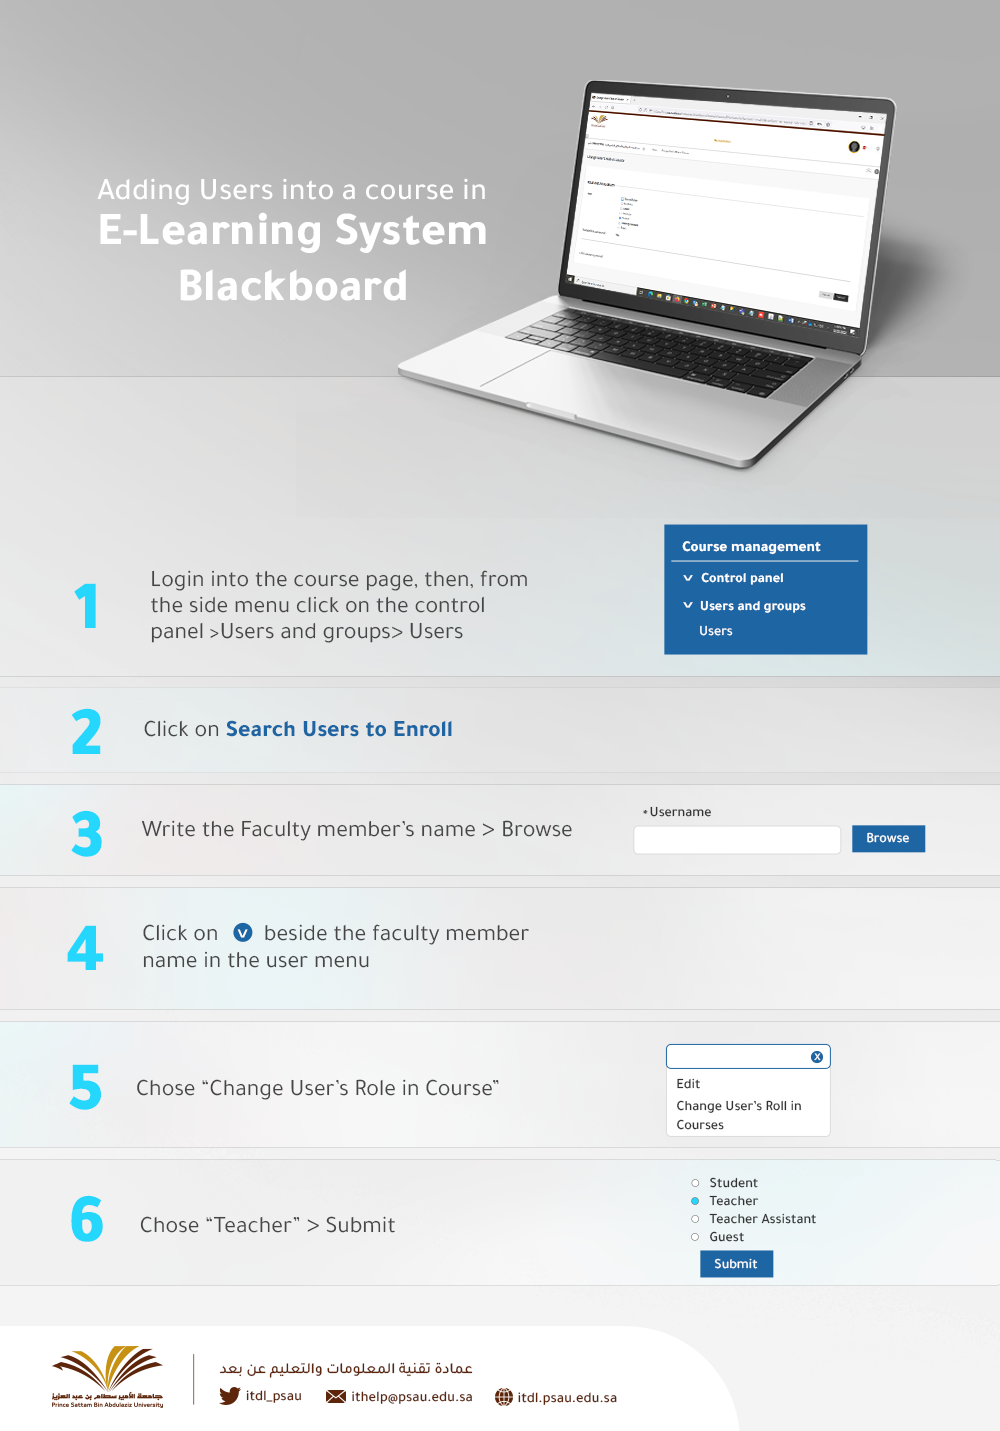 adding users into a course in E-Learning system blackboard